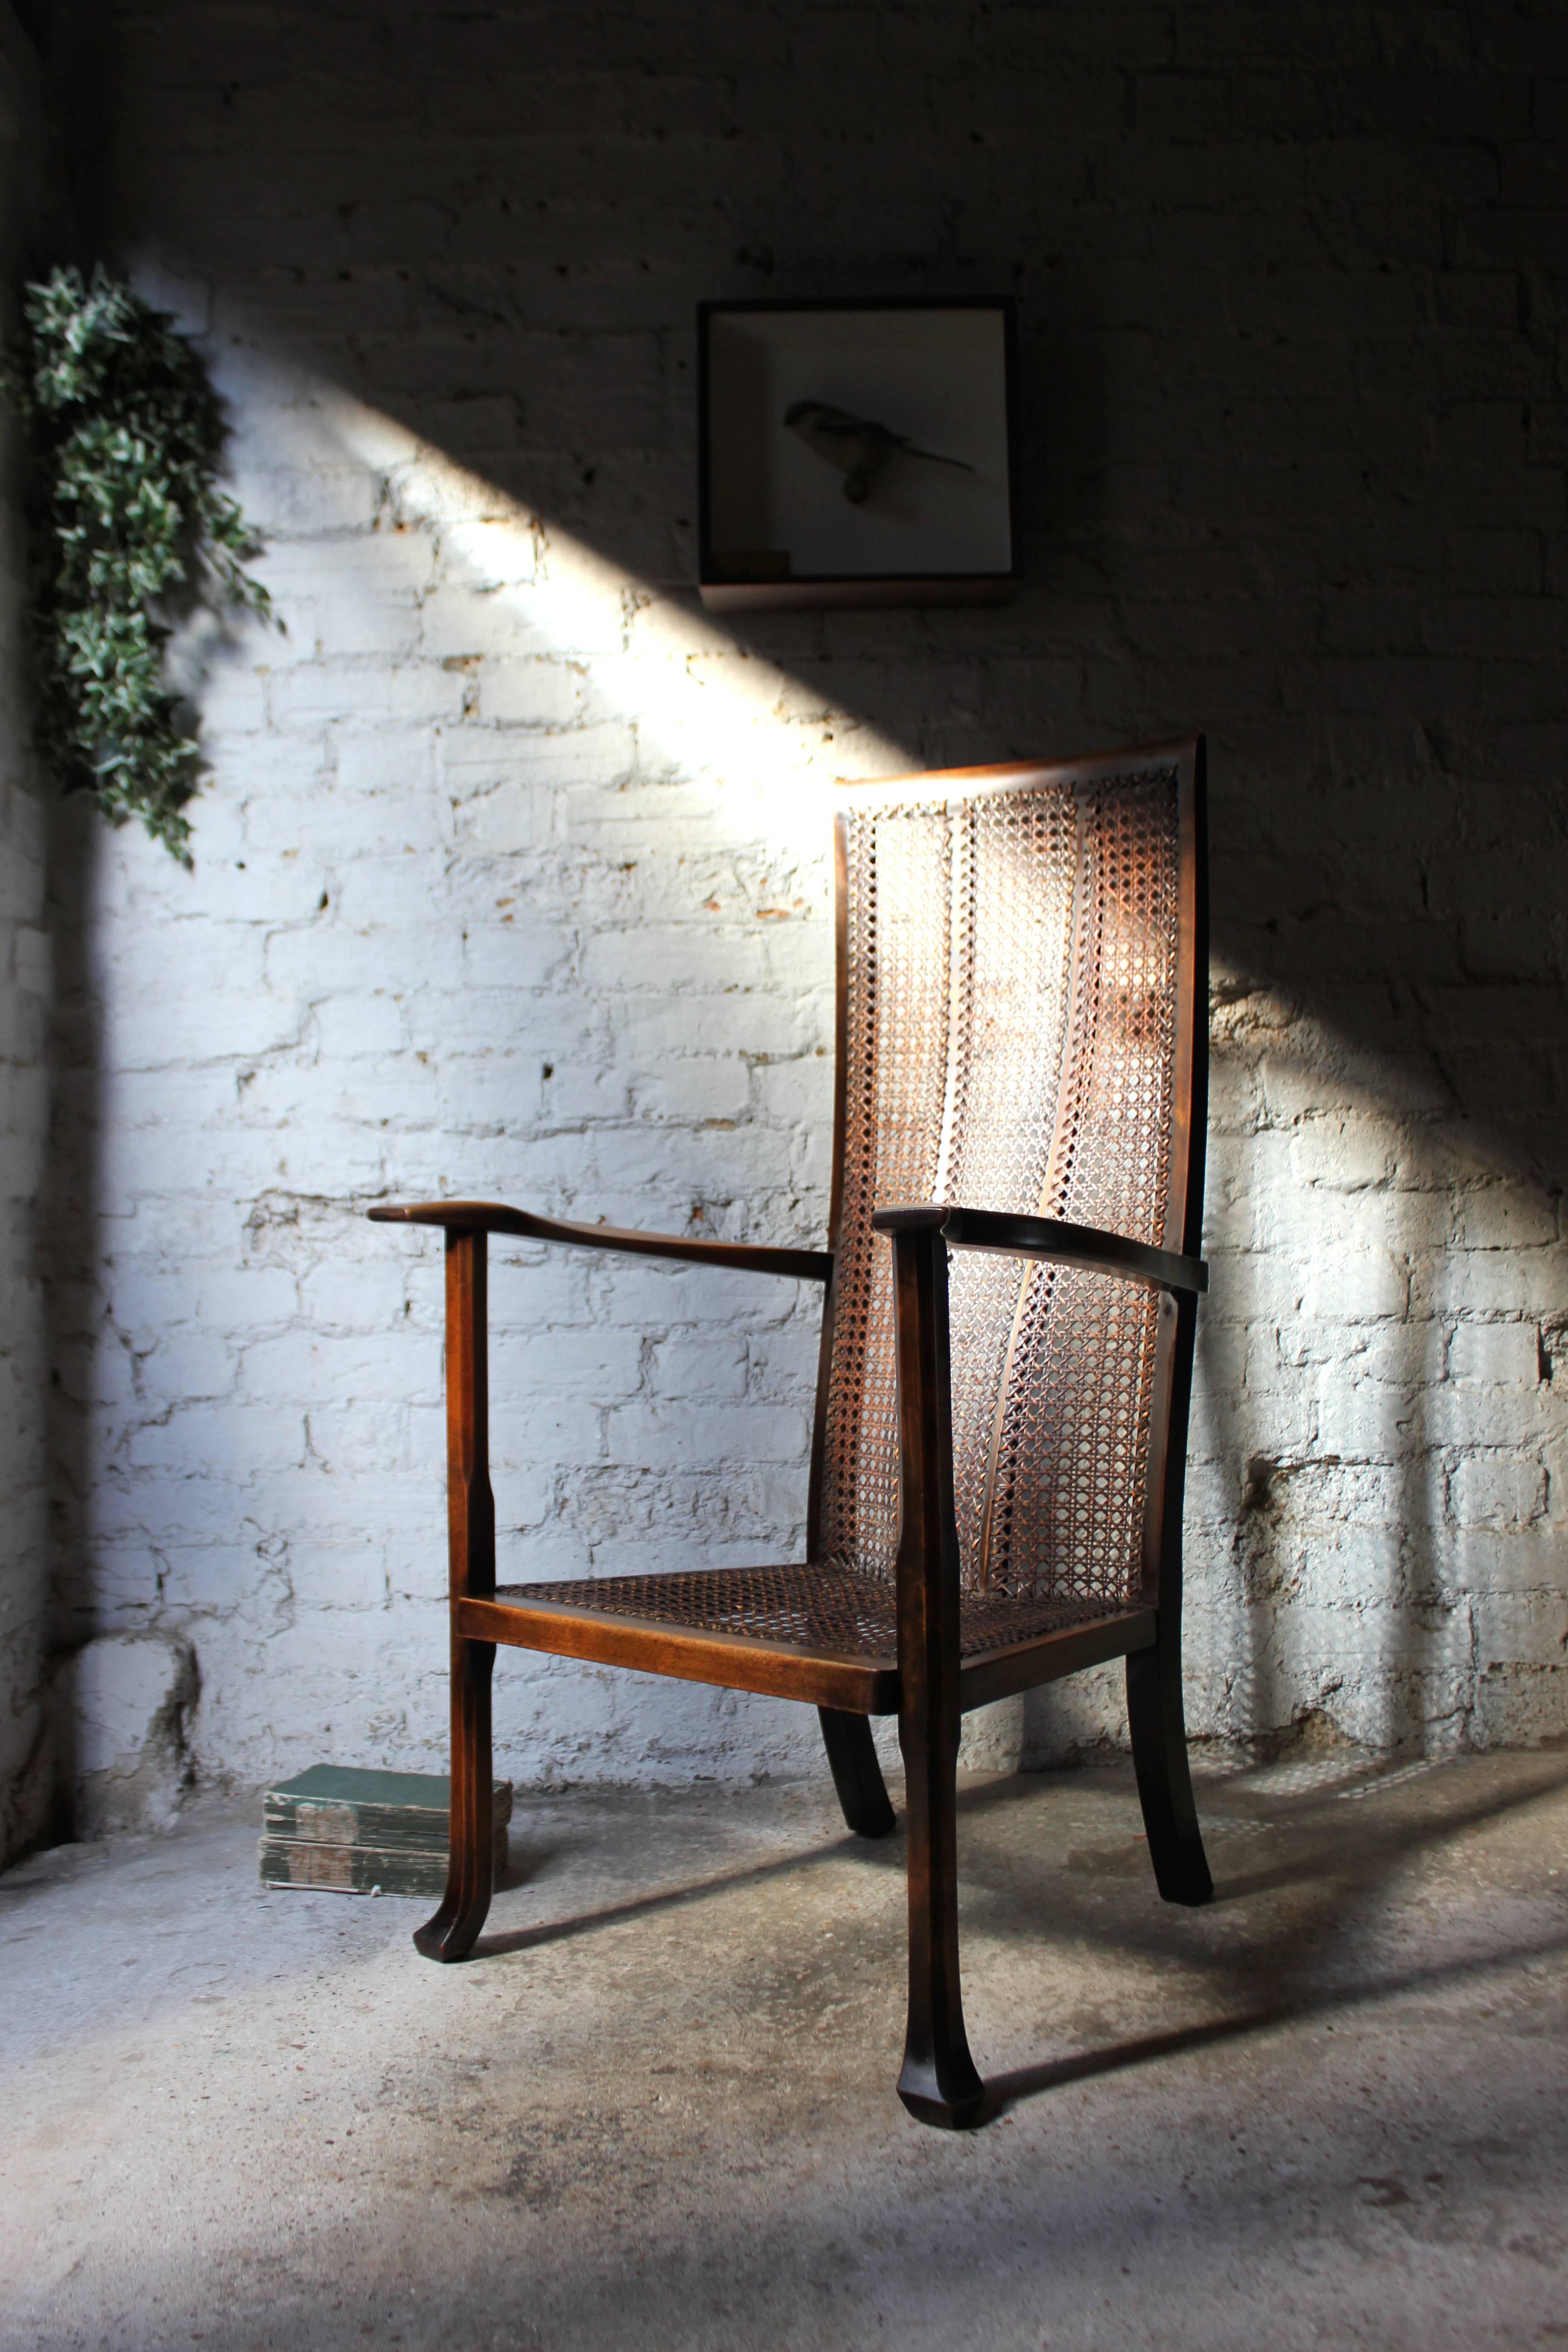 Early 20th Century Arts & Crafts Period High-Back Oak & Wicker Open Armchair, circa 1900-1915